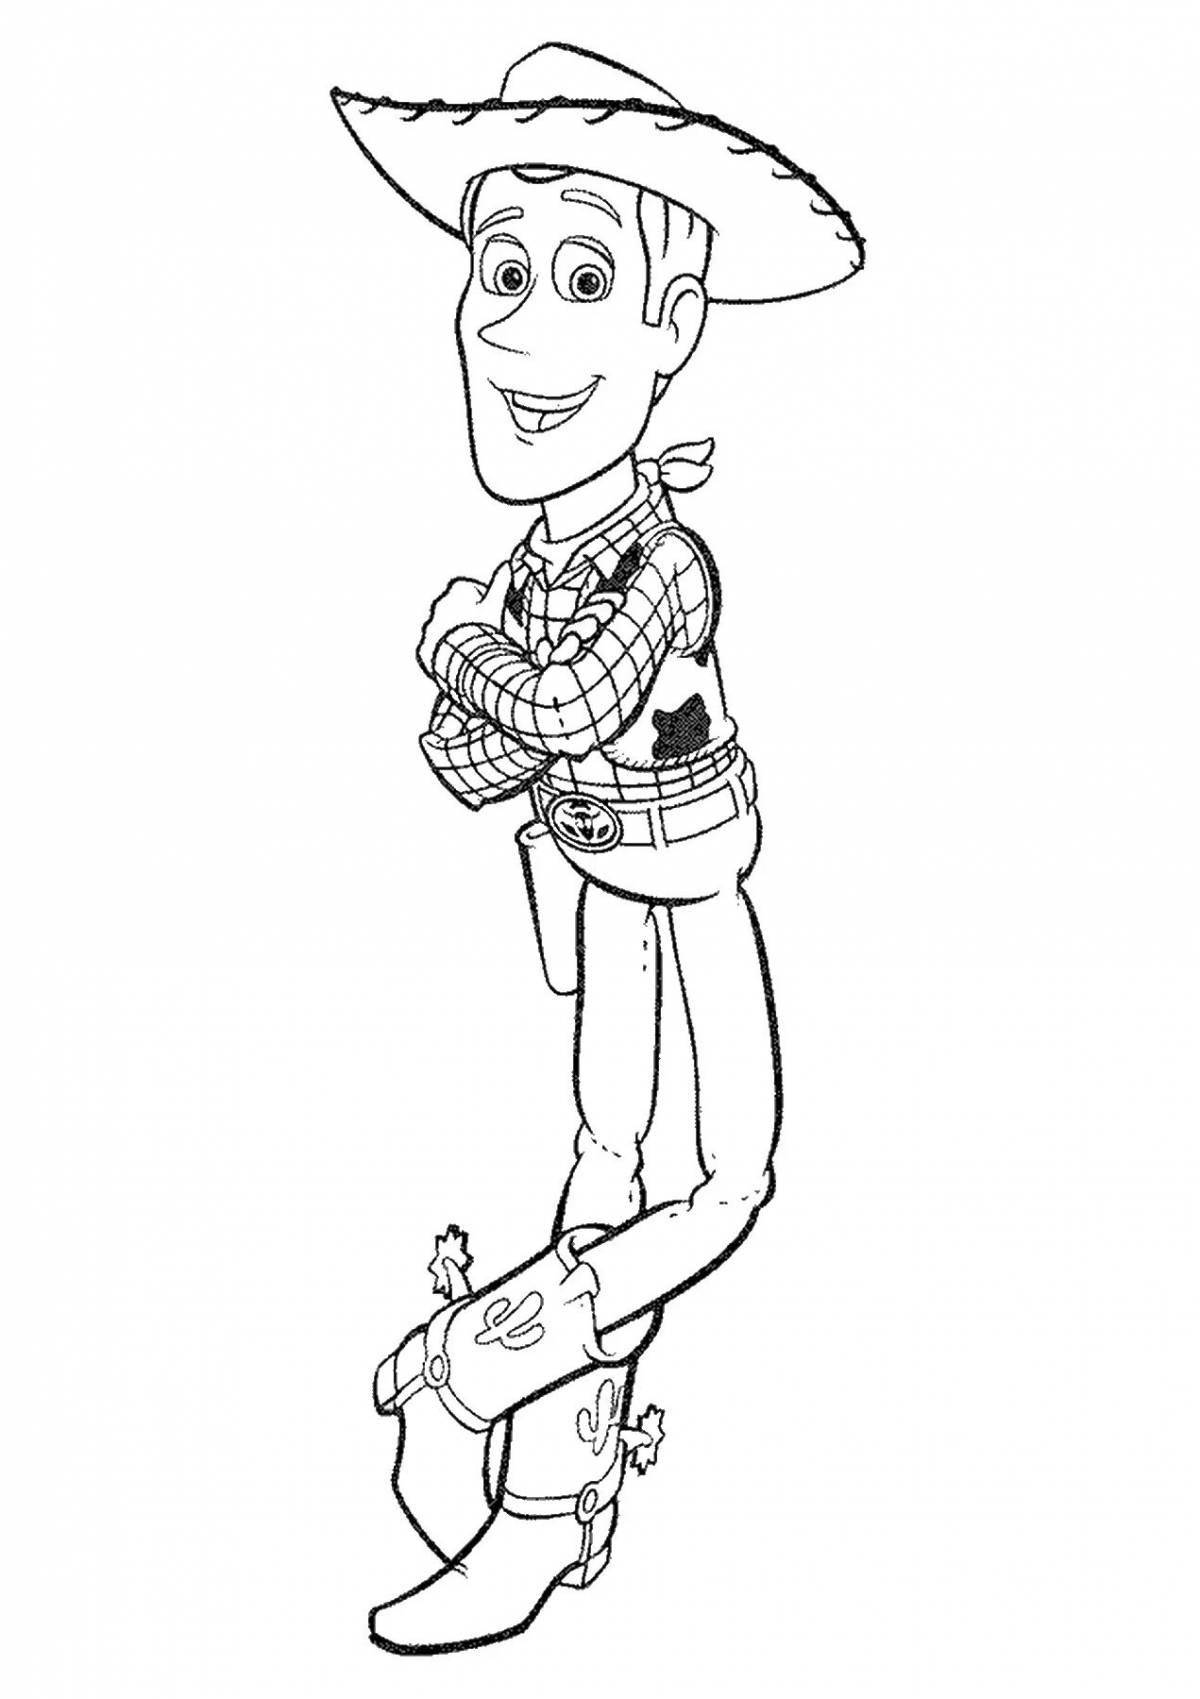 Joyful andy coloring page